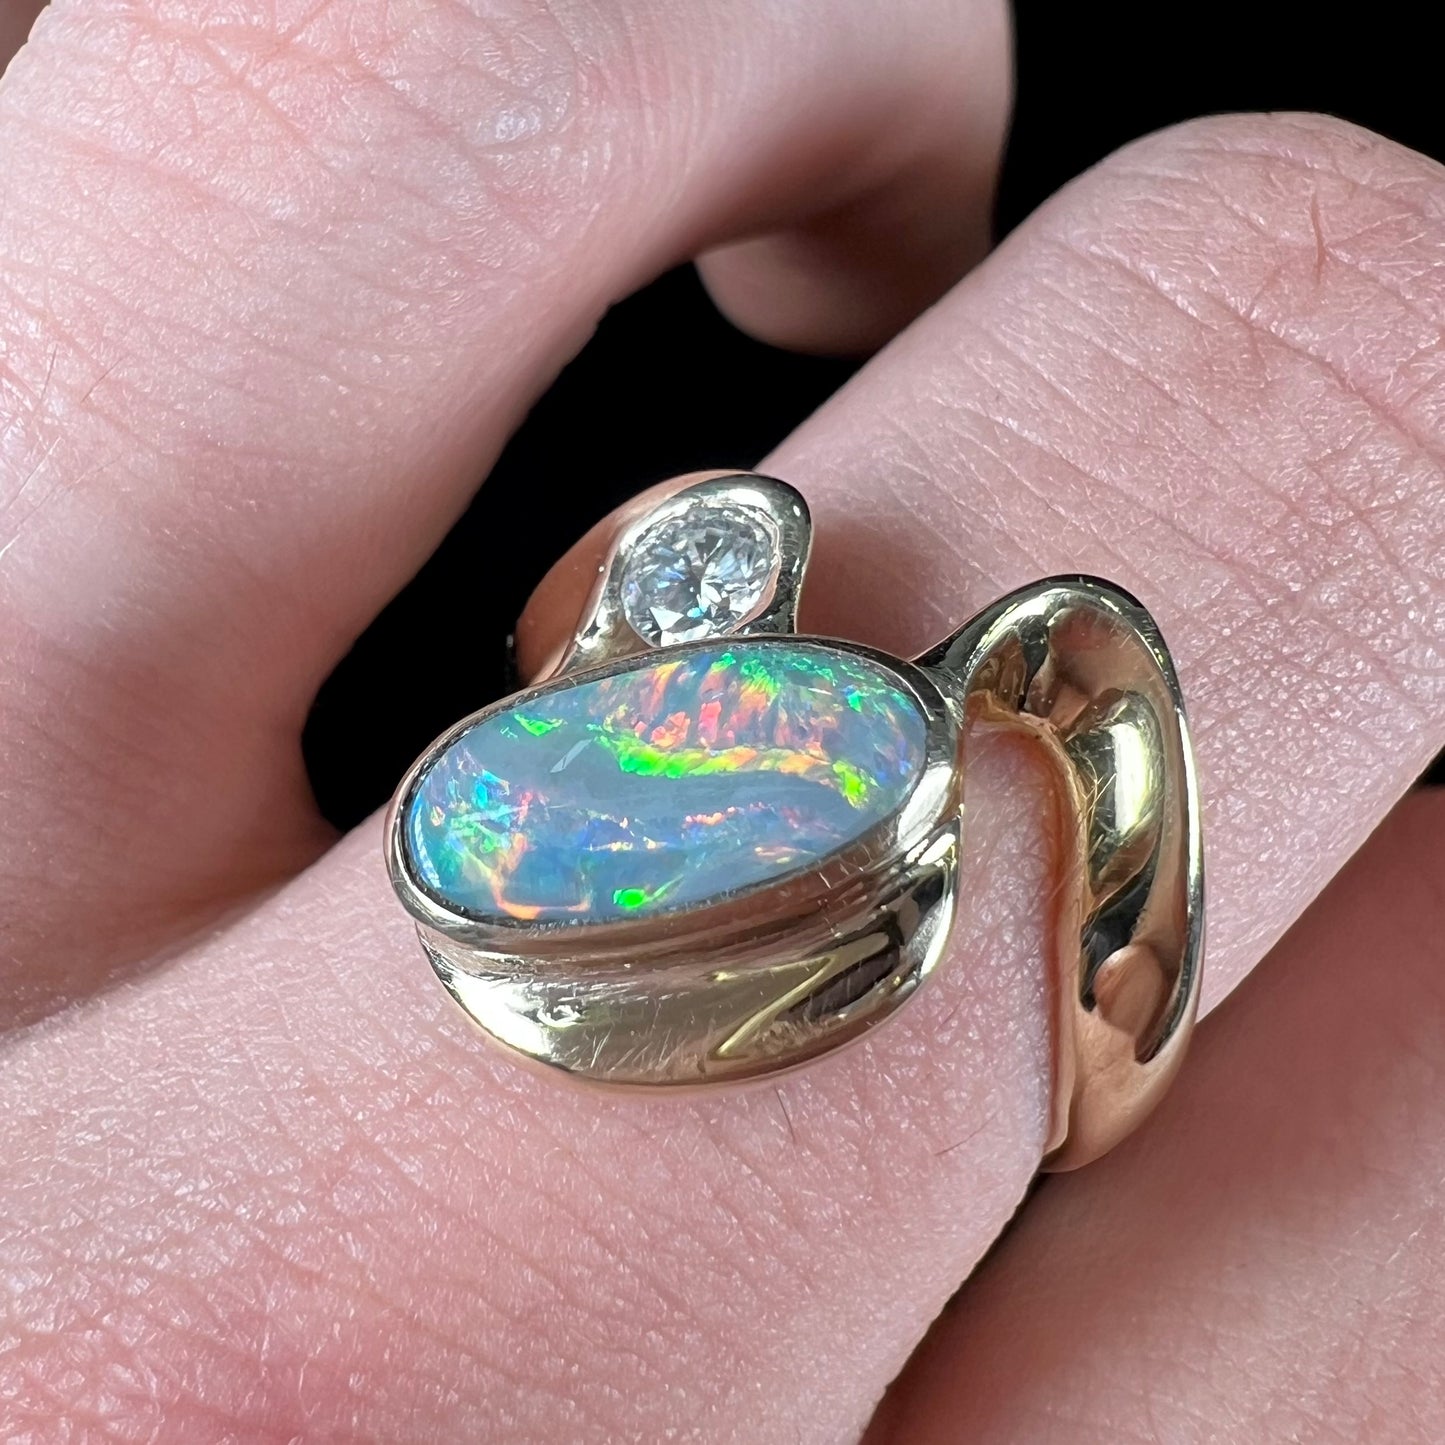 A ladies' yellow gold, bezel set ring mounted with a natural 1.15 carat black opal and round diamond.